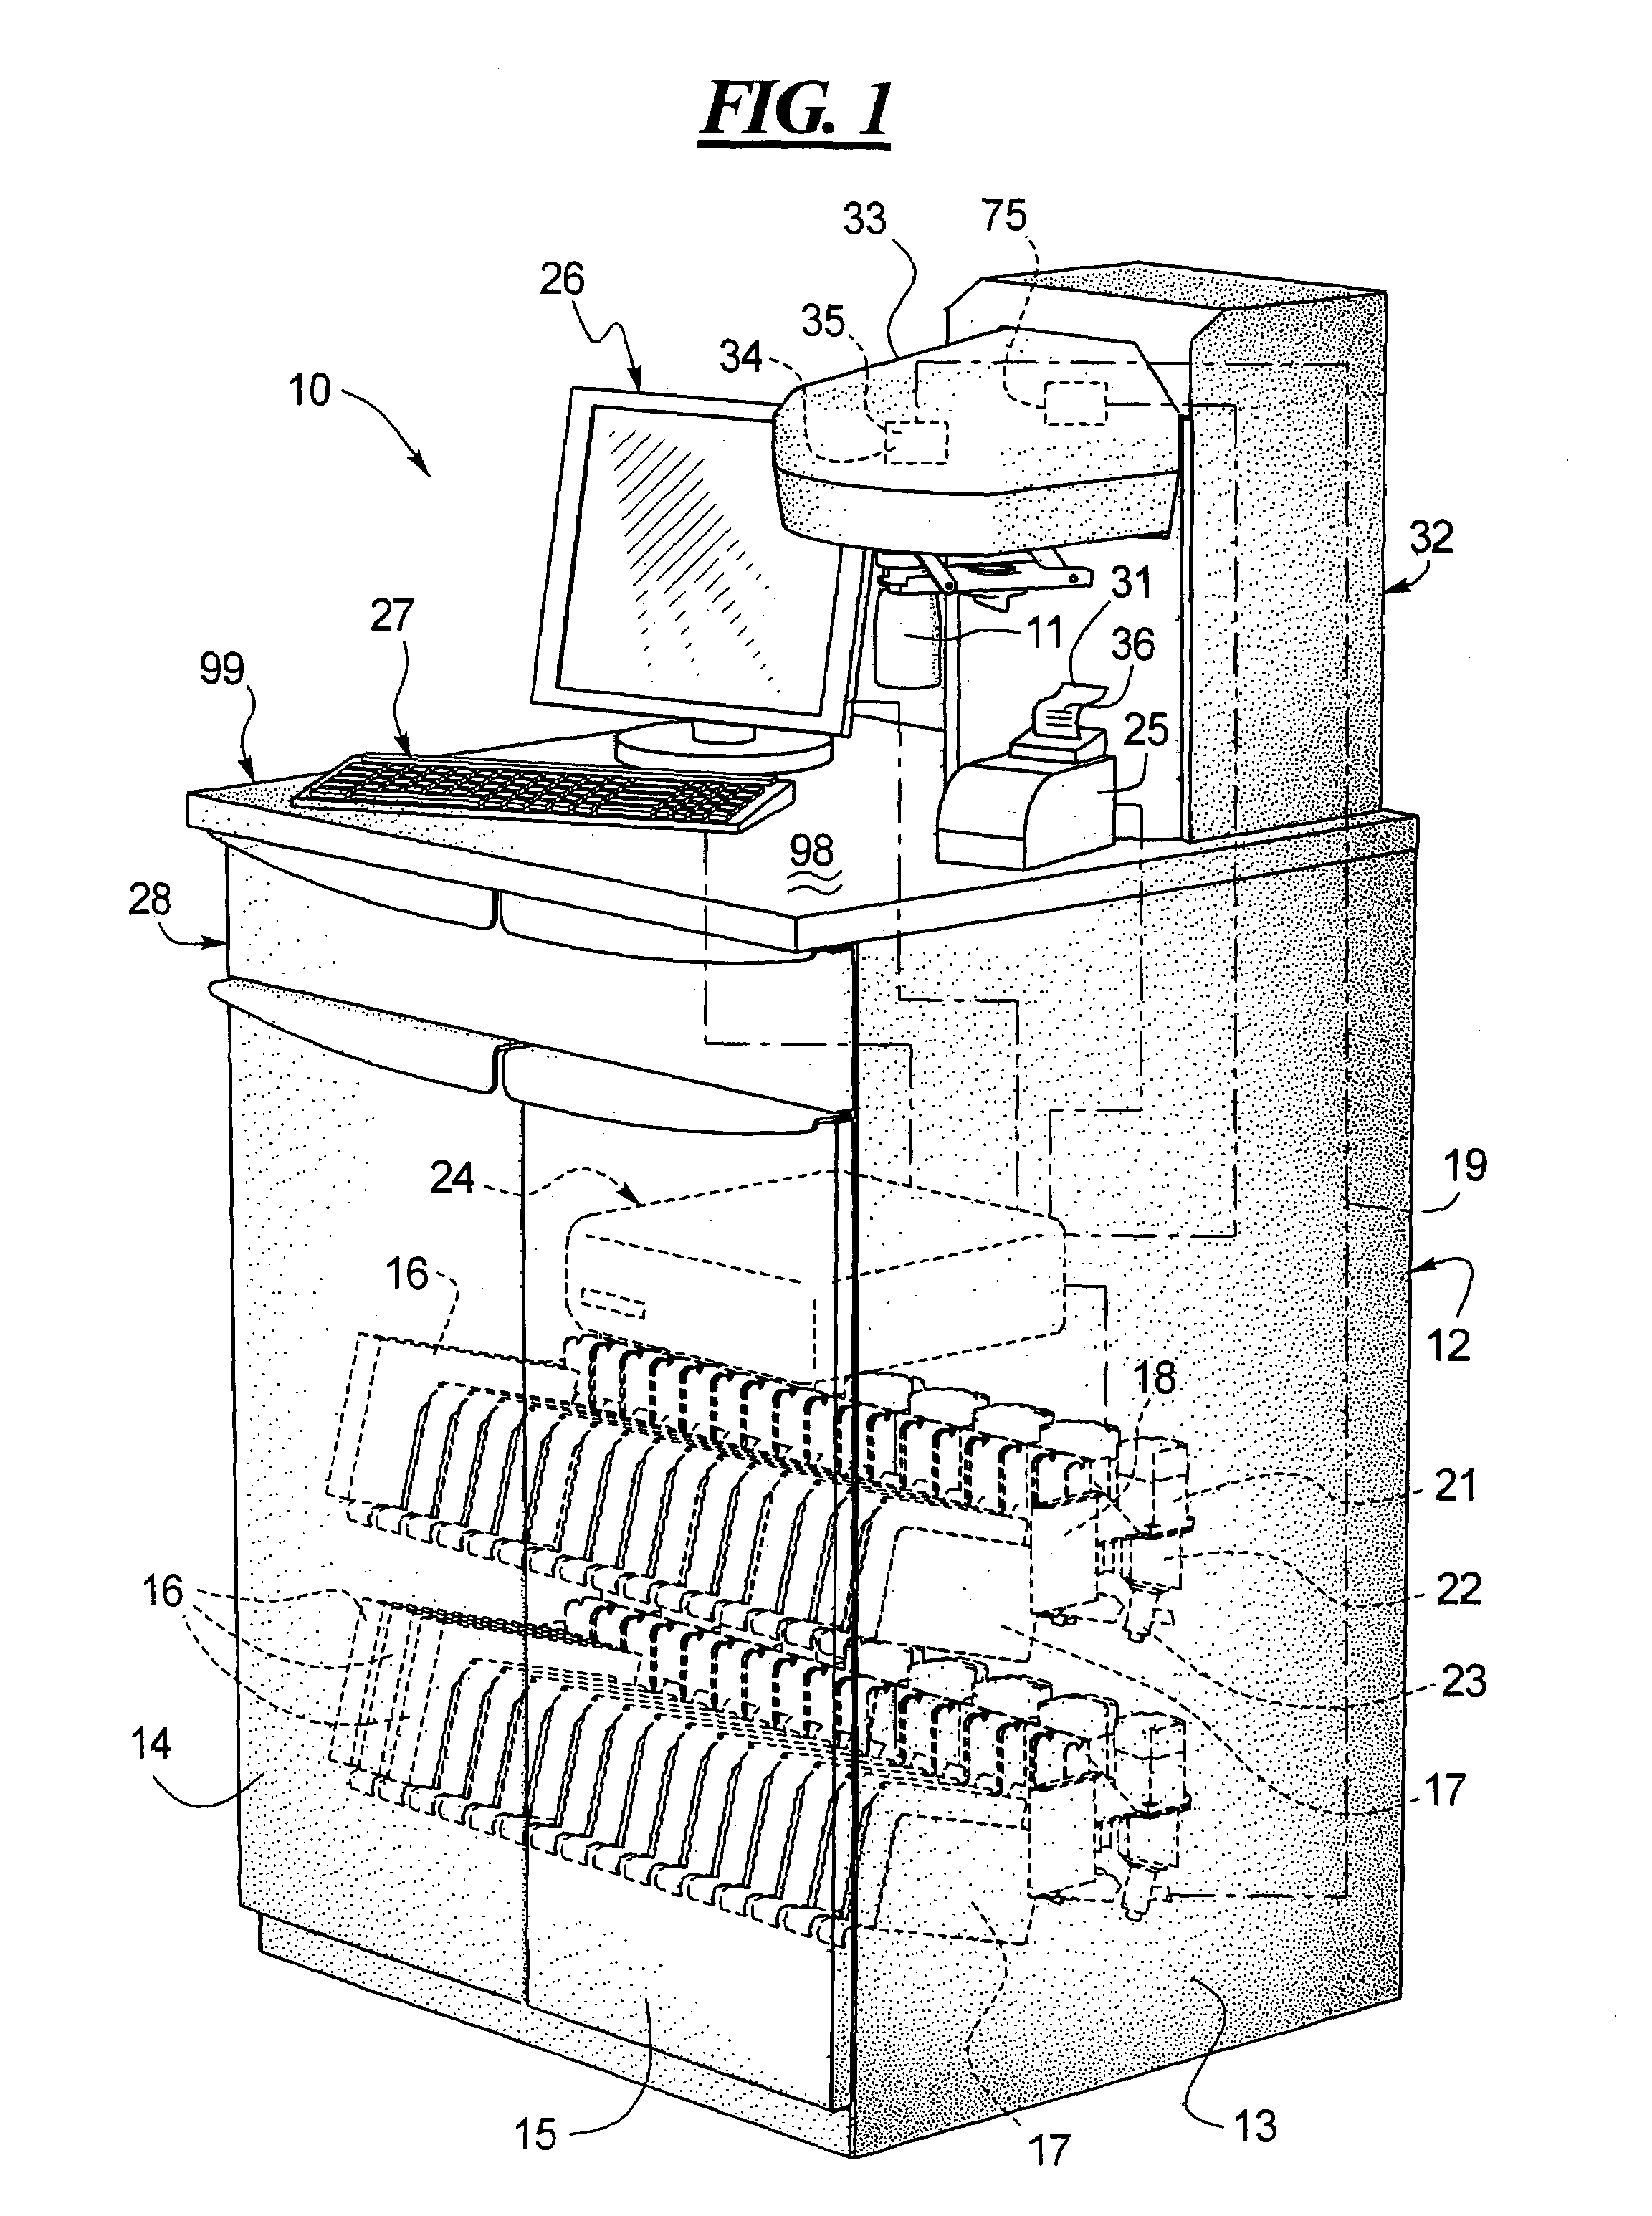 Apparatus for dispensing paint and stain samples and methods of dispensing paint and stain samples